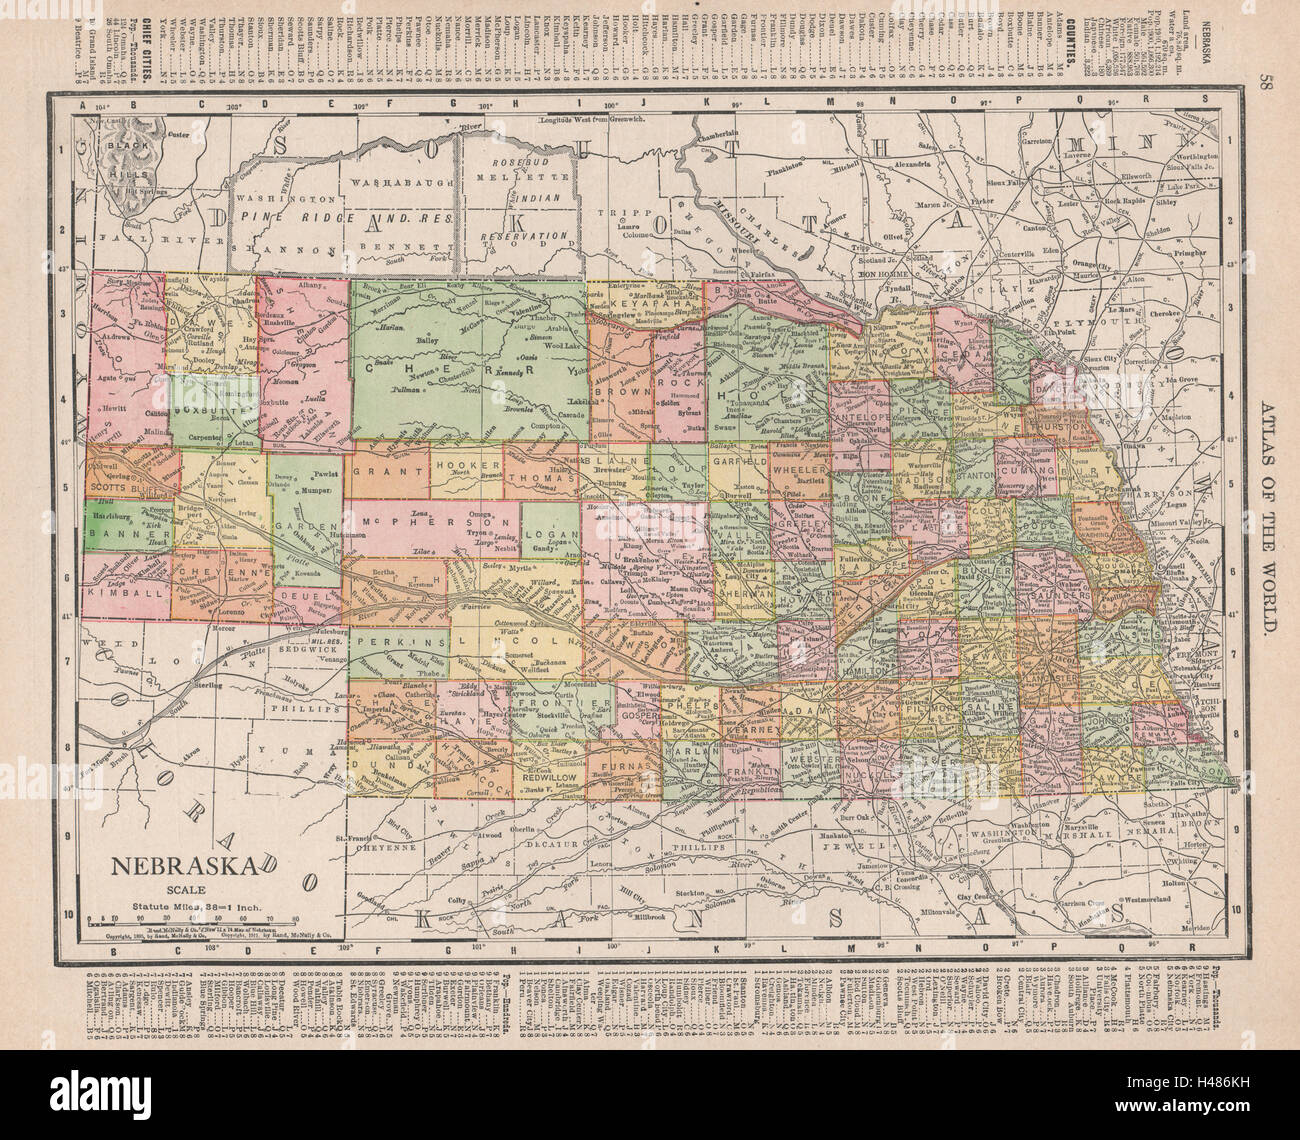 Nebraska state map showing counties. RAND MCNALLY 1912 old antique chart Stock Photo